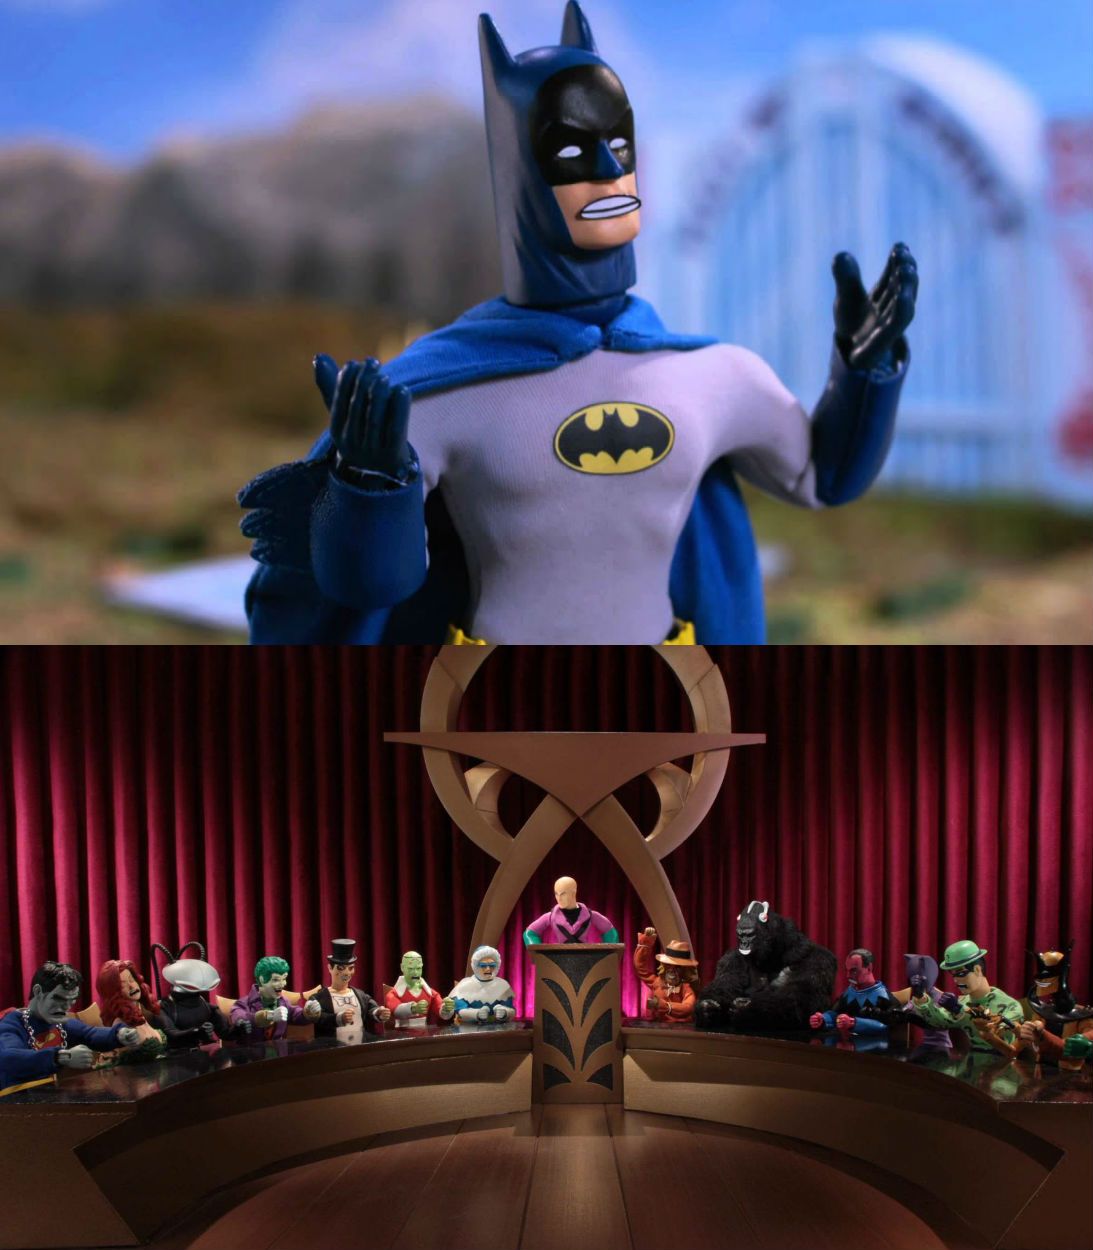 Robot Chicken DC Comics 2 Villains In Paradise - Giving Bats A Ride - Worked To The Bone vertical